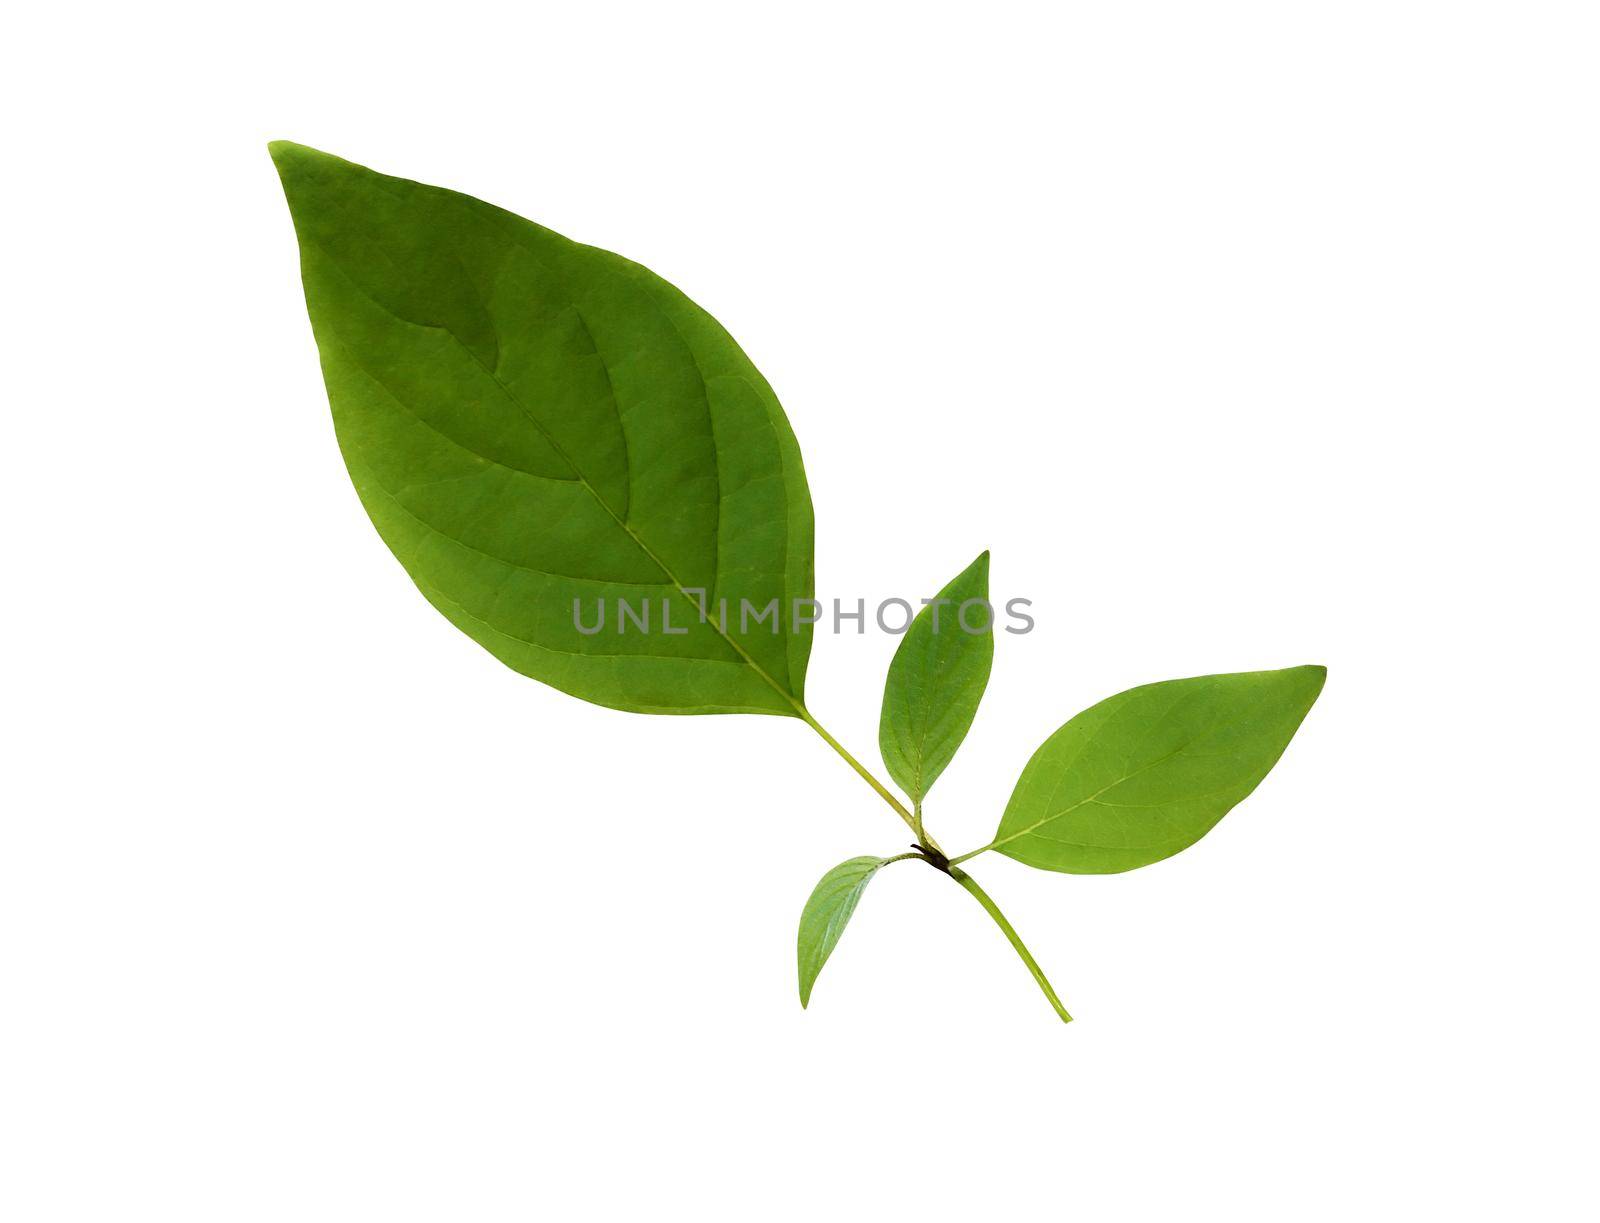 Freshness green leaf isolated on white background with clipping path